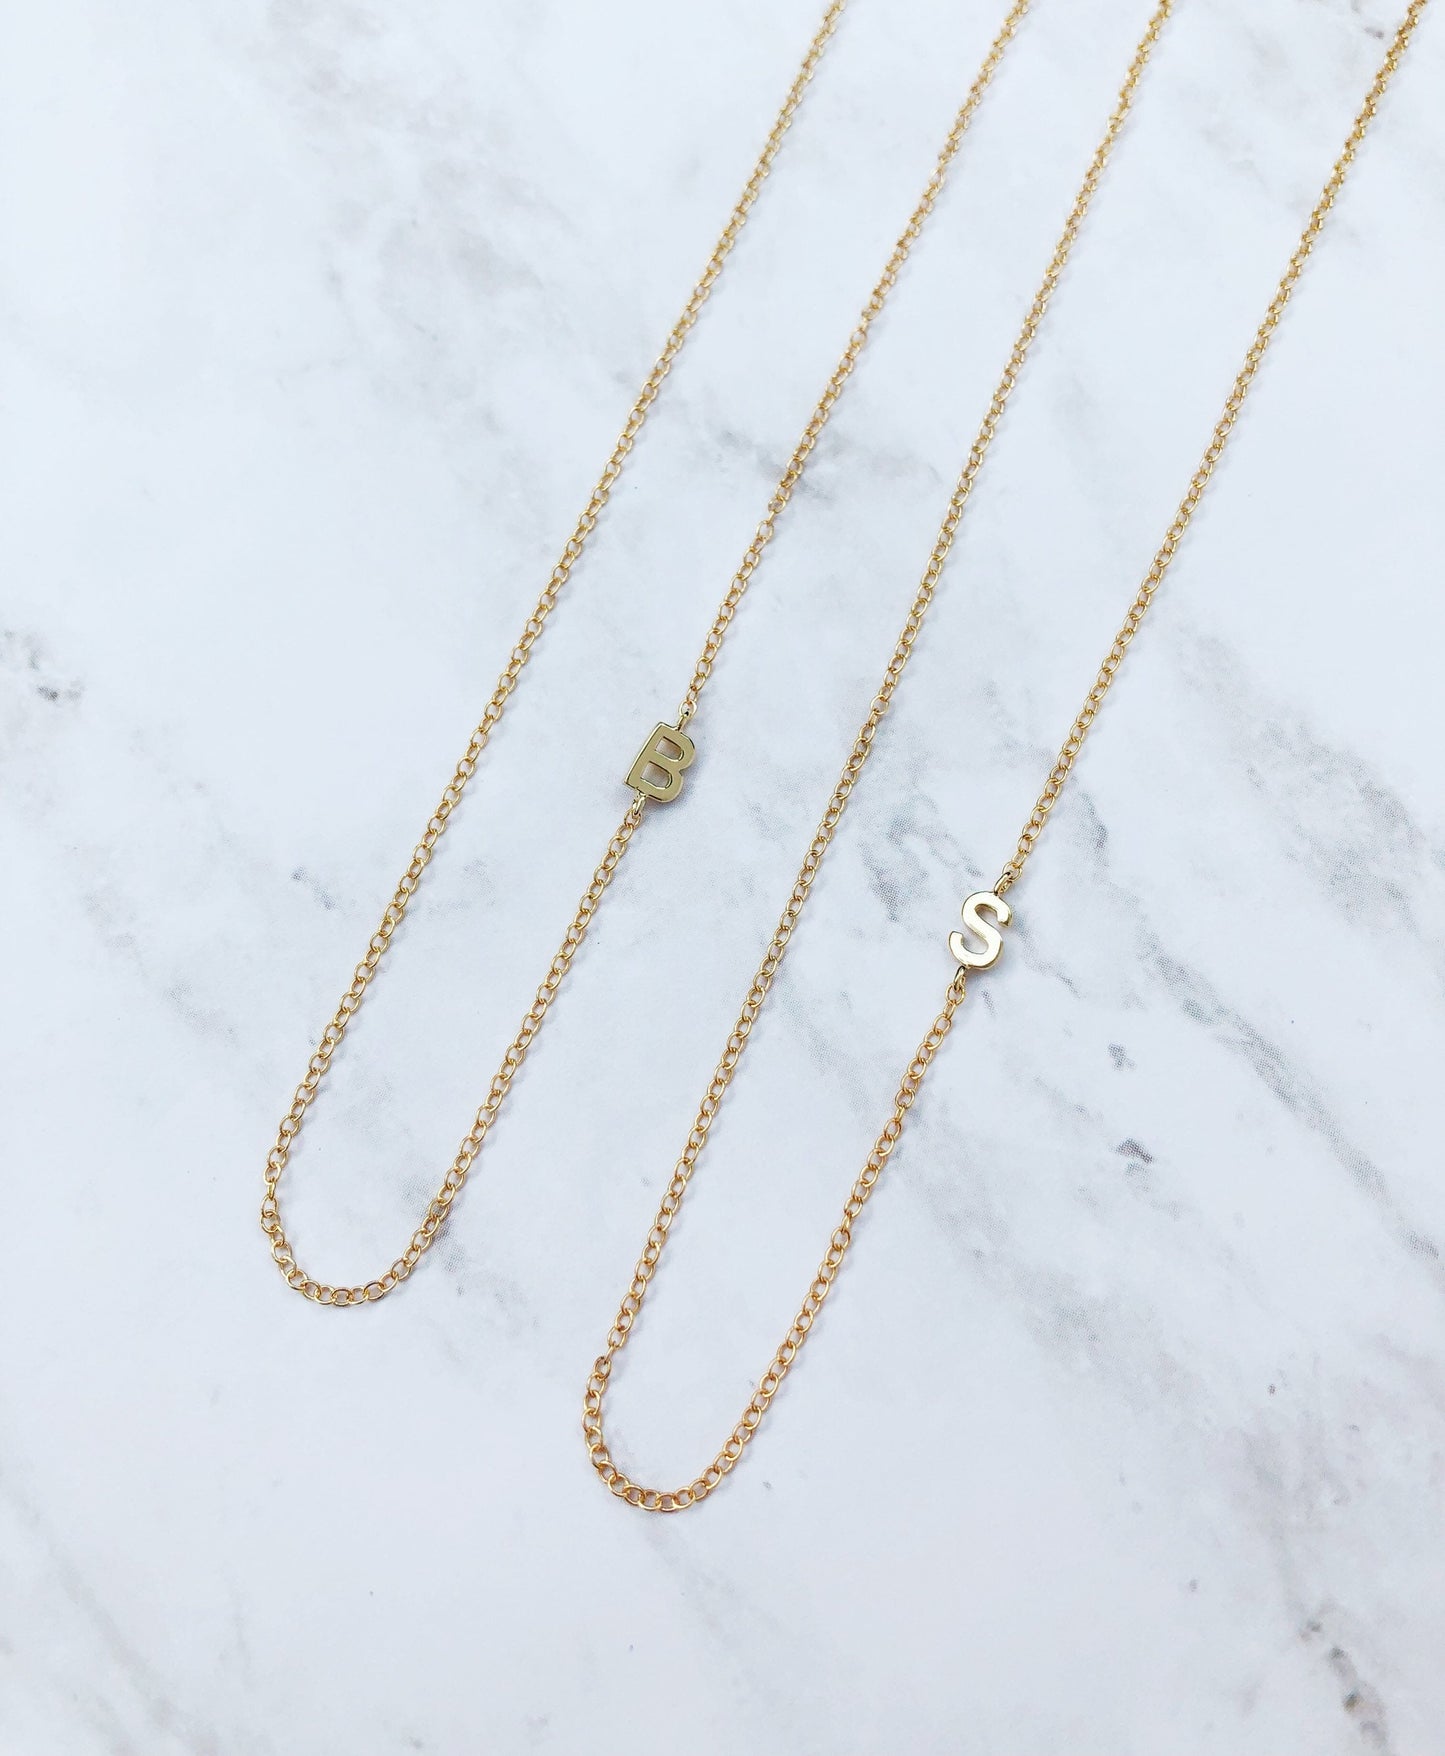 Sideways initial necklace, bridesmaid gift, dainty initial necklace, personalized jewelry, initial necklace, dainty jewelry, letter